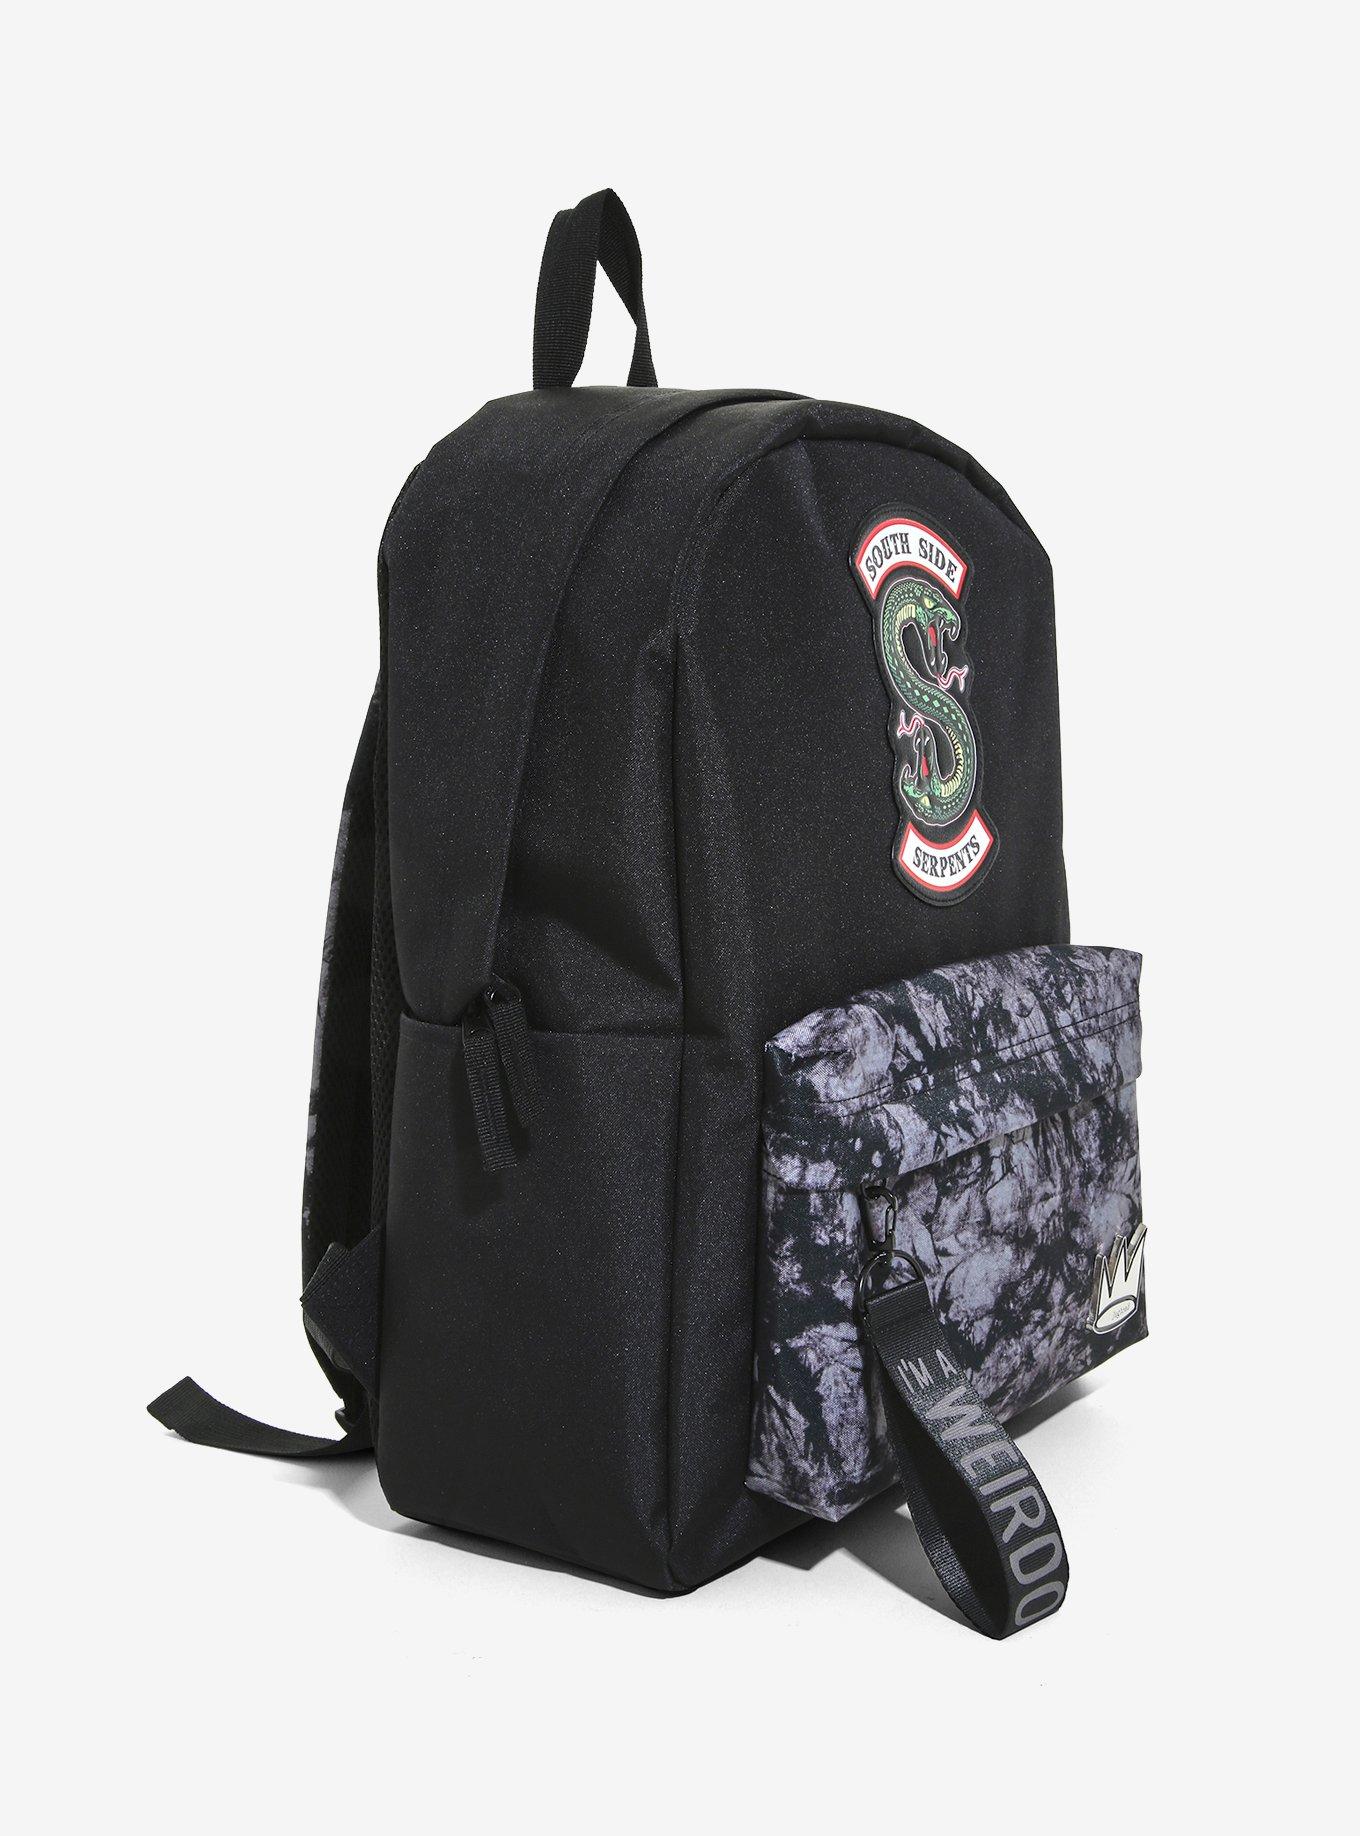 Riverdale Southside Serpents Acid Wash Backpack Hot Topic Exclusive, , alternate